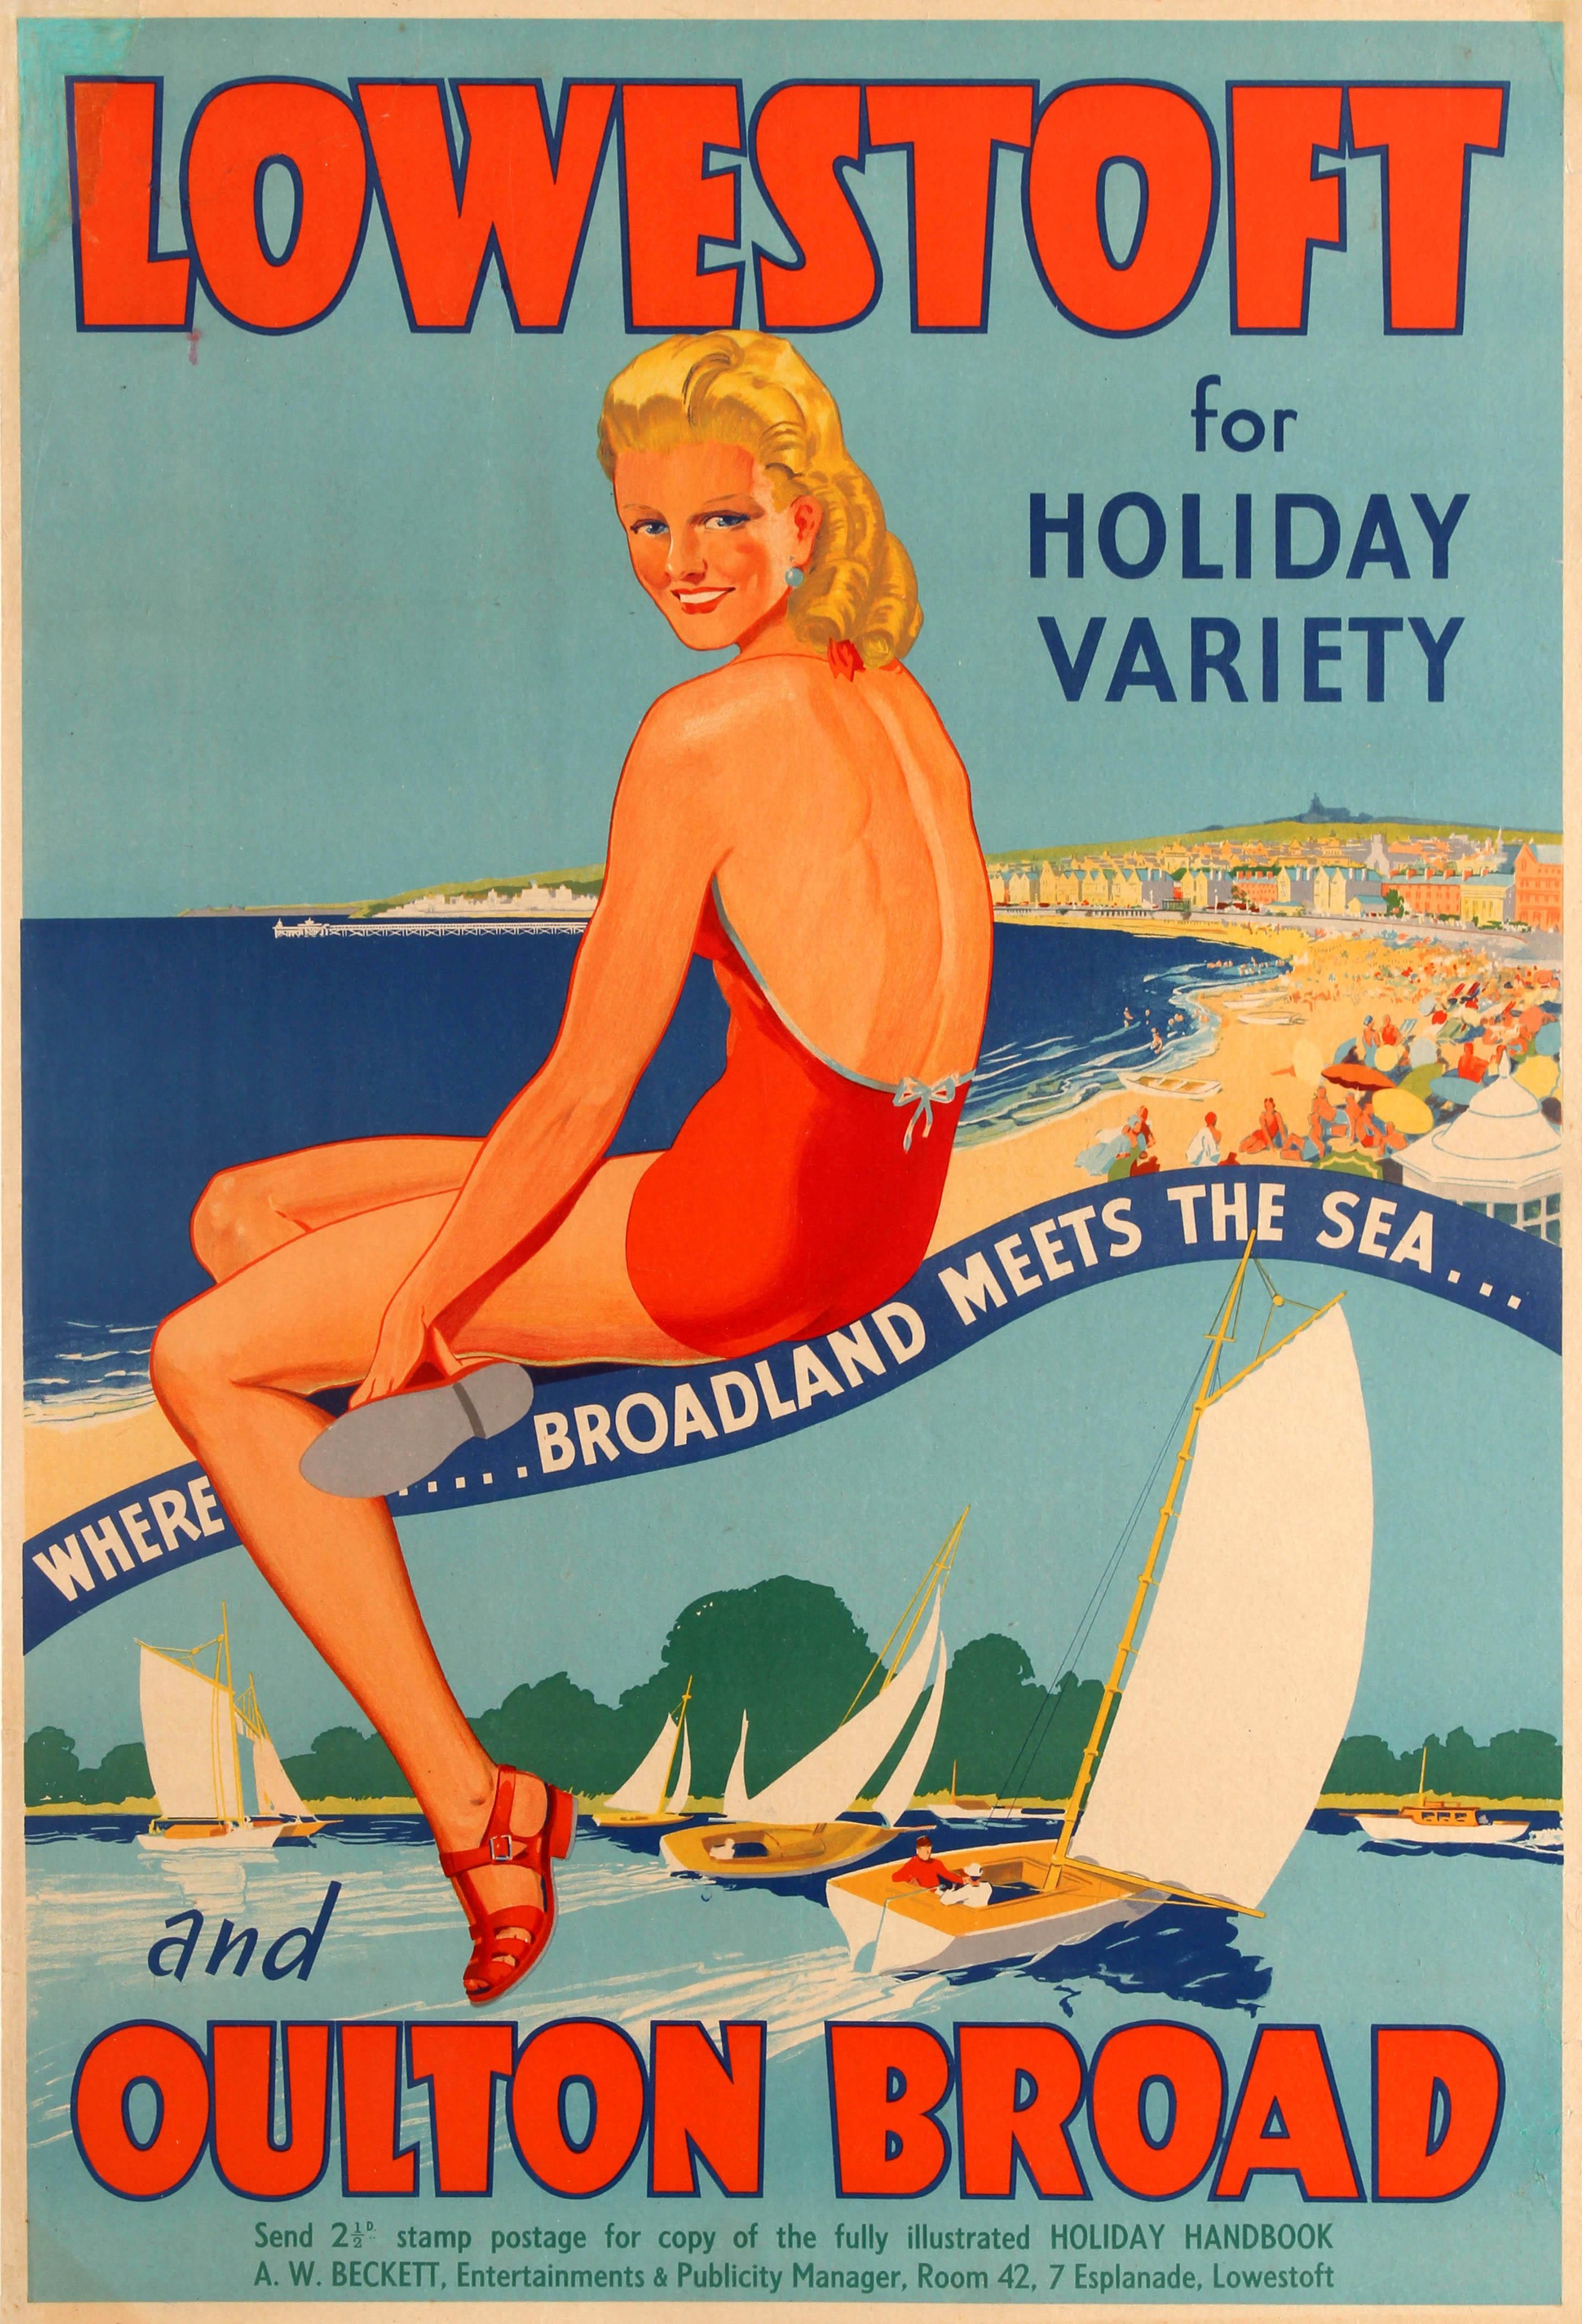 Unknown Print - Original Vintage Travel Poster Lowestoft And Oulton Broad For Holiday Variety